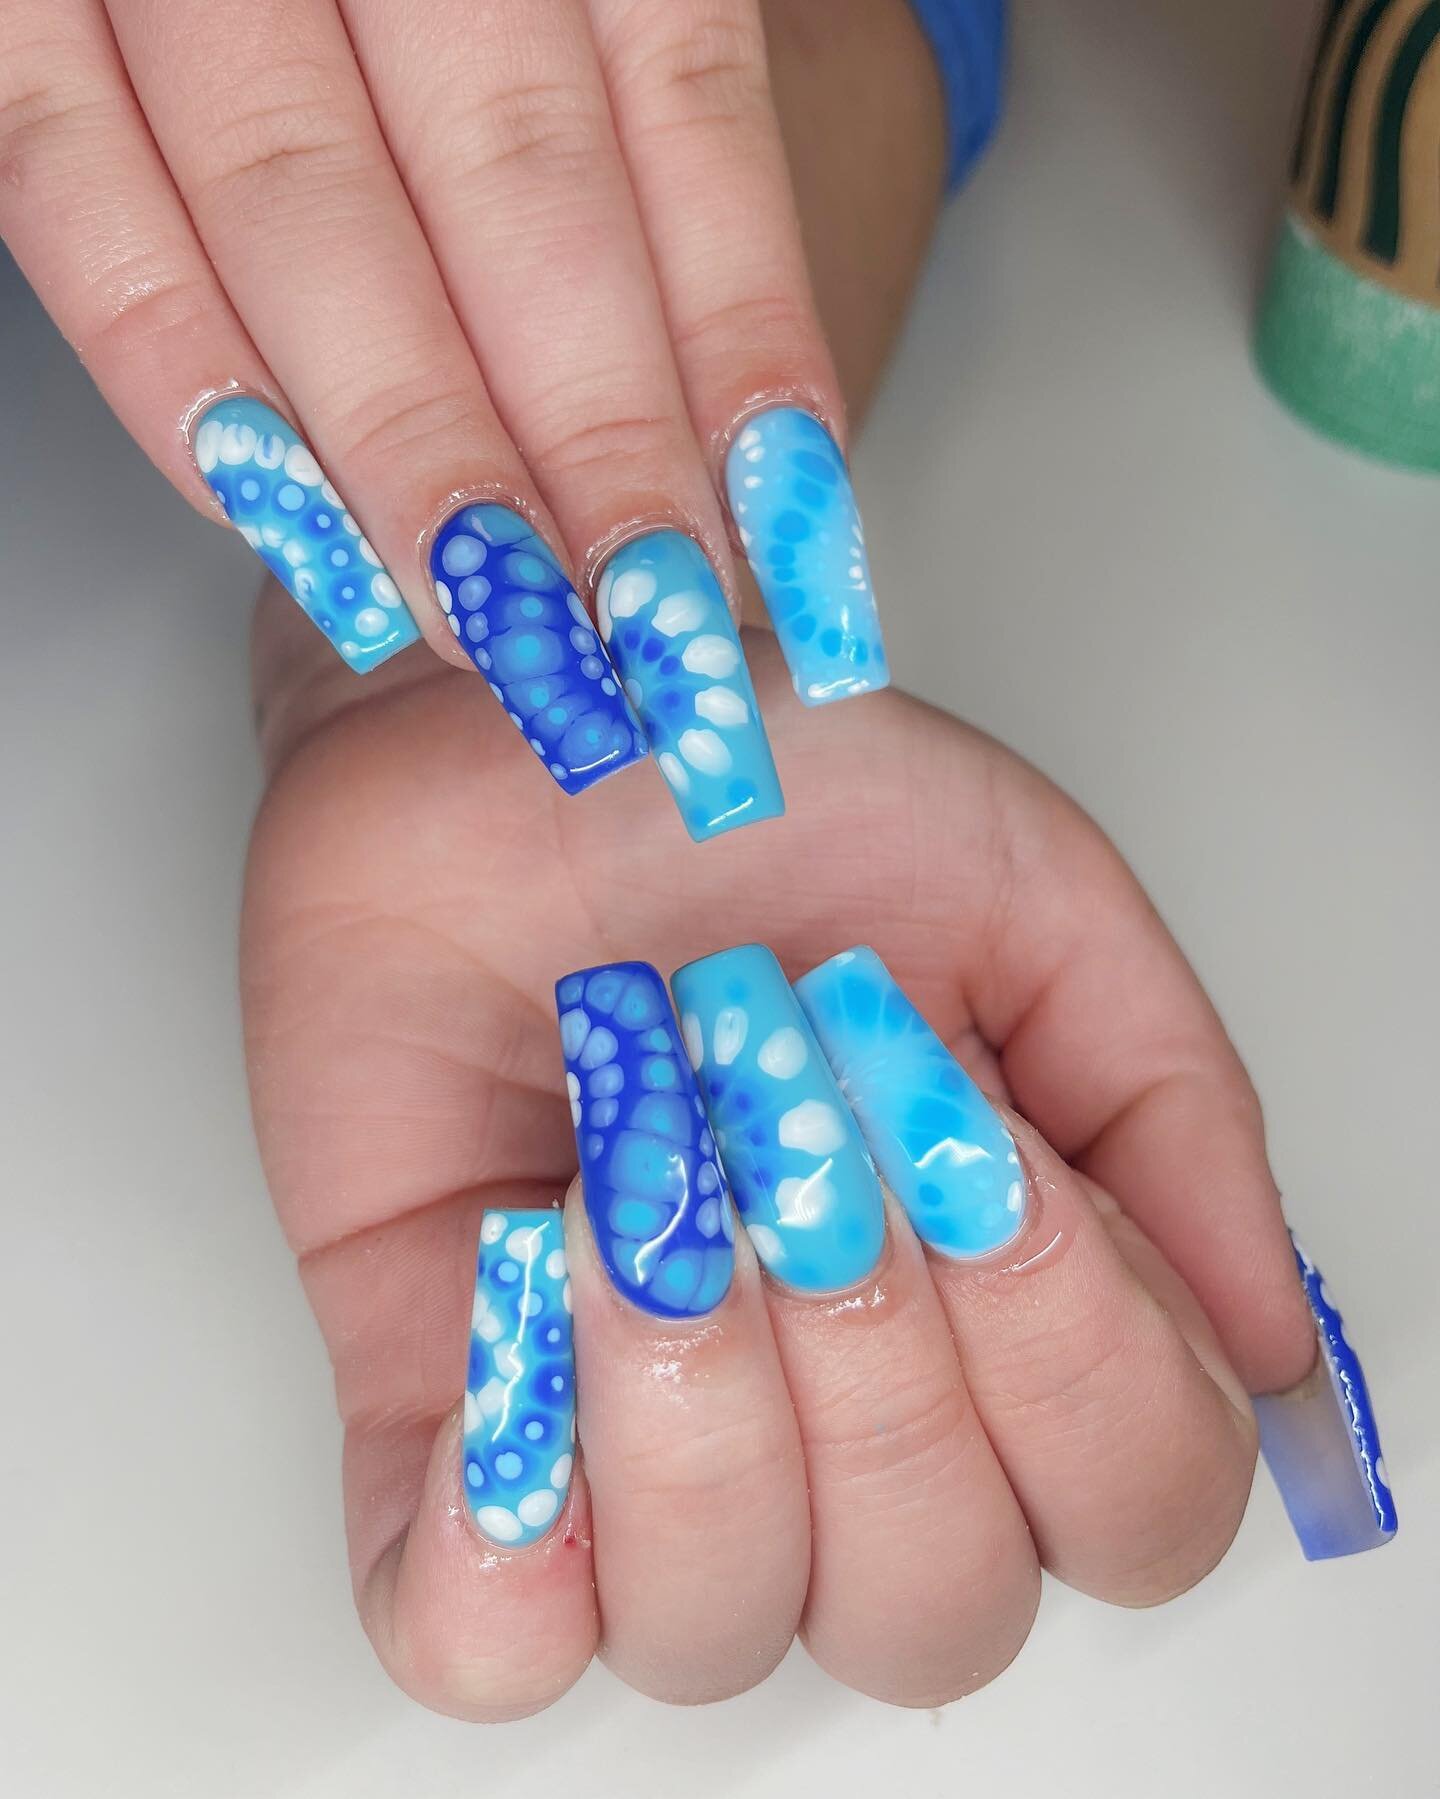 Blue tie-dye vibes 💙💙 
&bull;
&bull;
&bull;
Don&rsquo;t forgot to pre book for your Christmas nails! December&rsquo;s starting to fill up fast and you don&rsquo;t wanna miss out💙